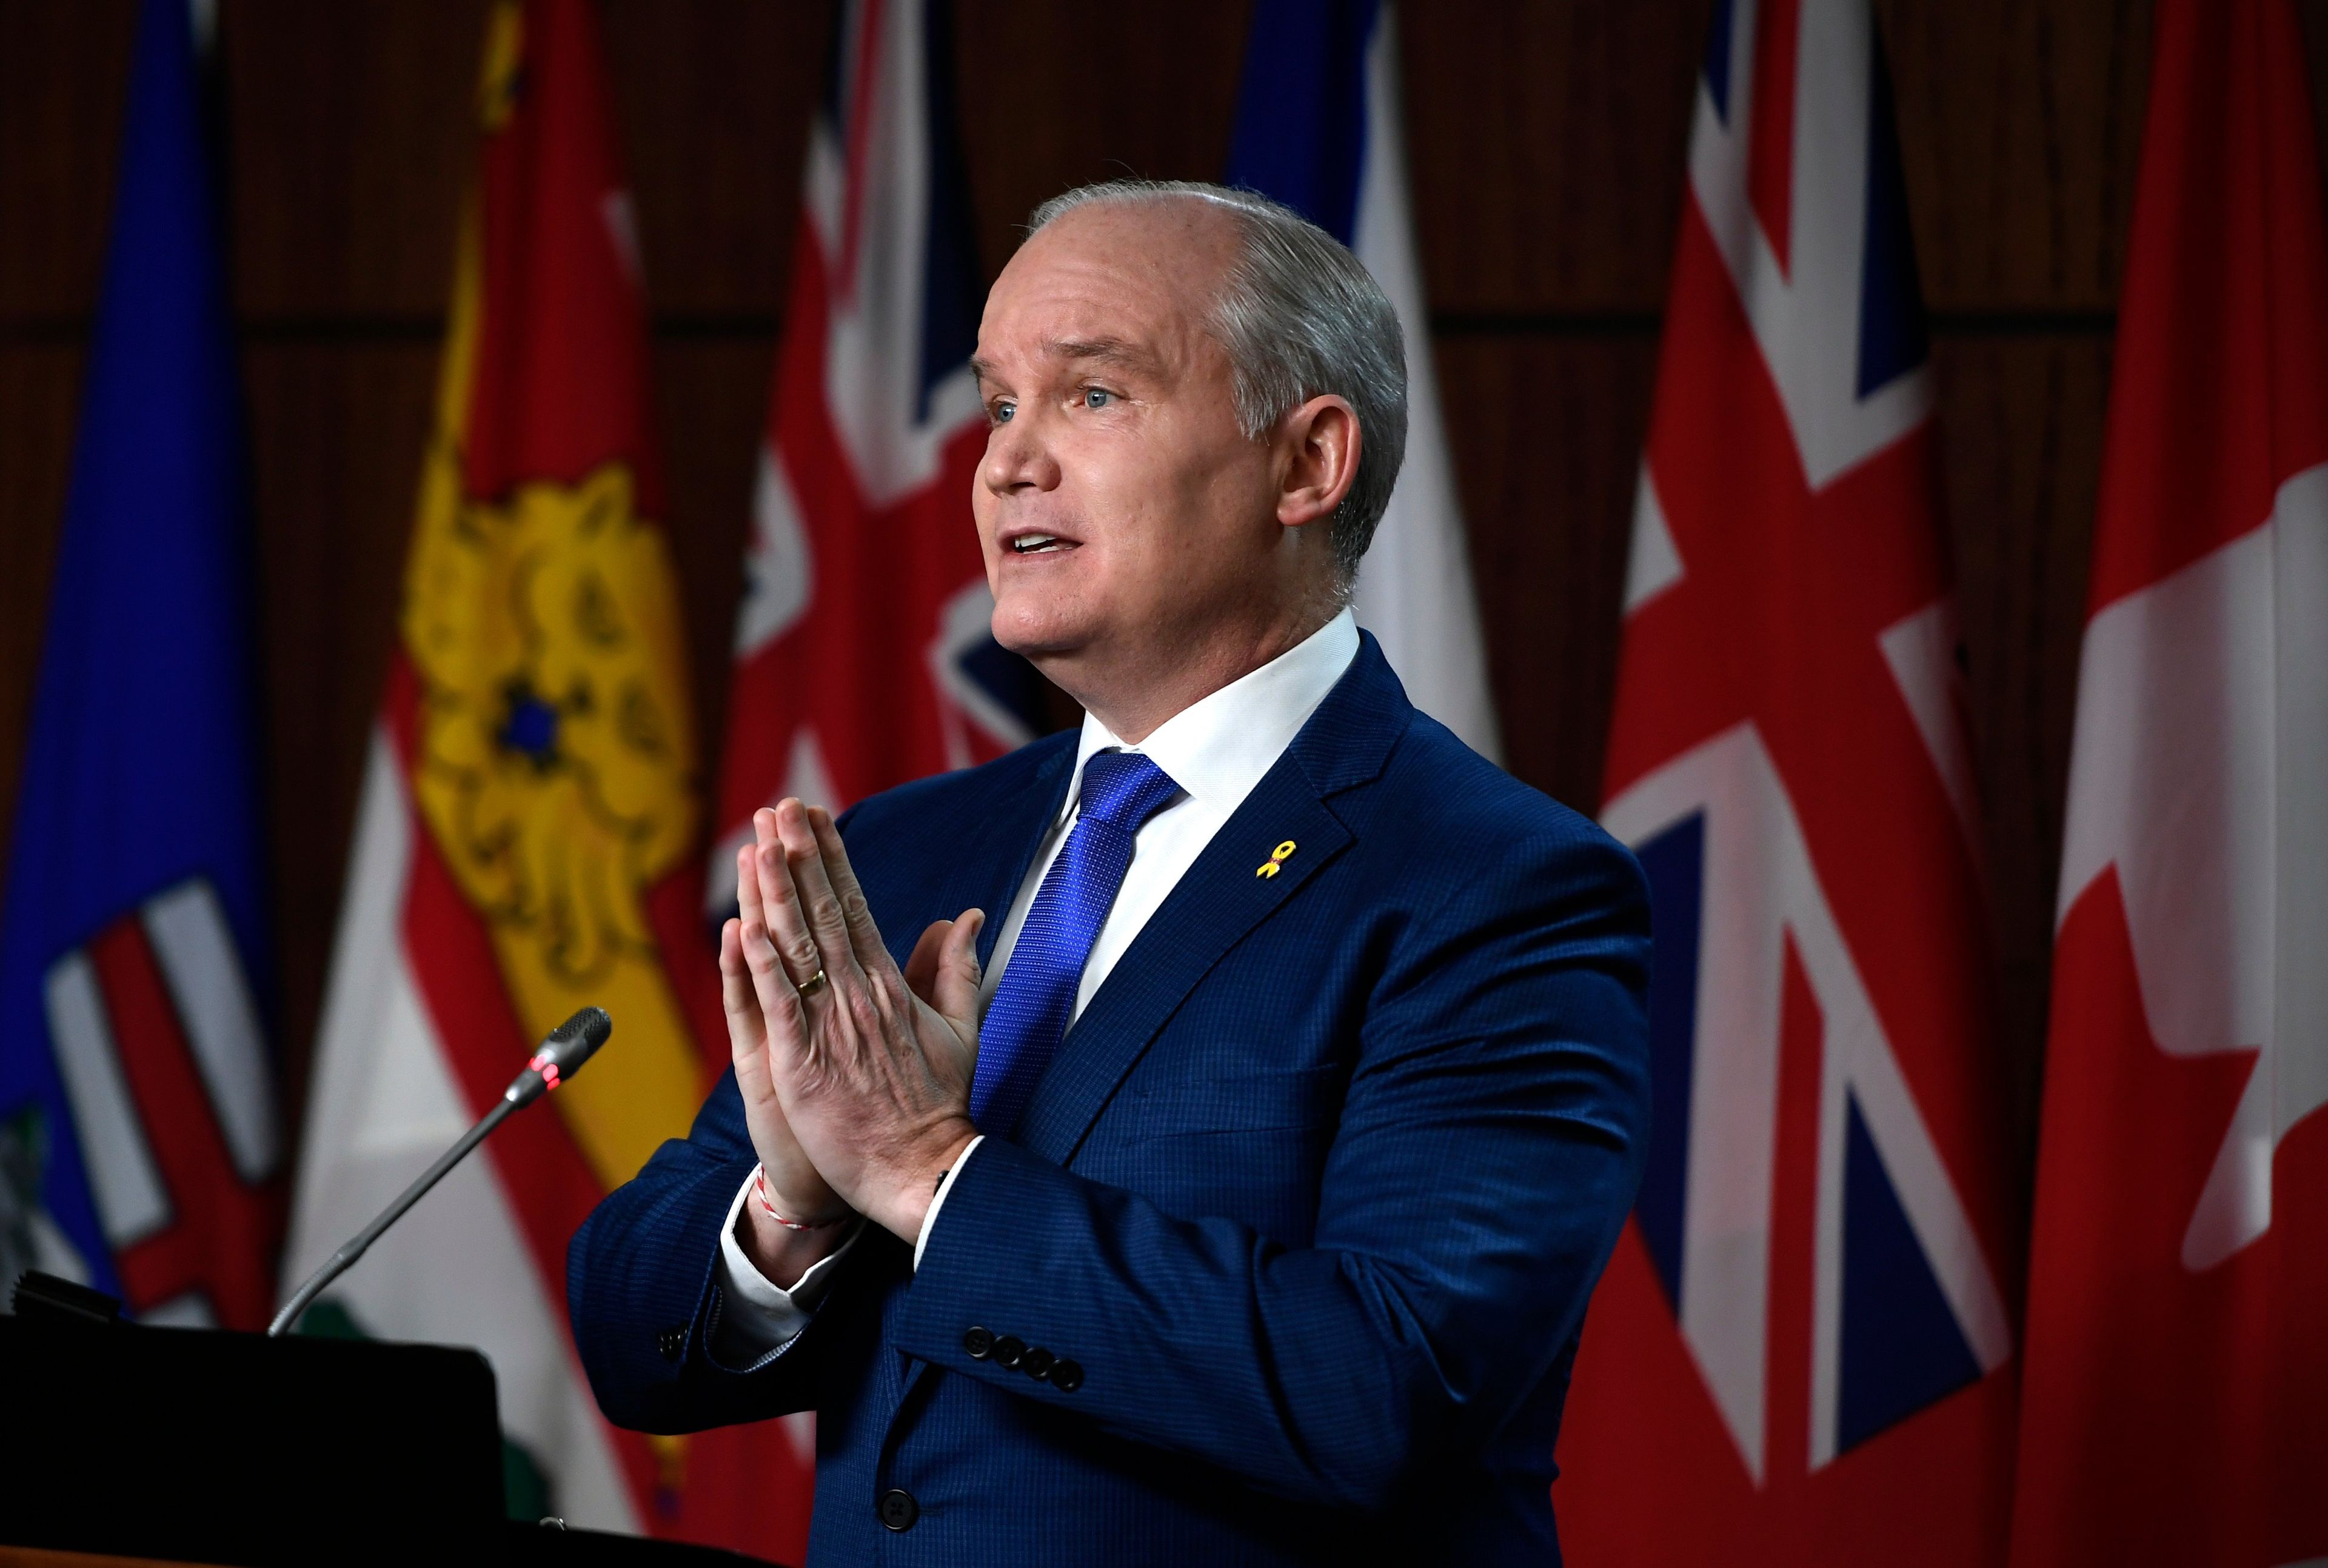 O'Toole speaks during a media availability on Parliament Hill on Jan. 27, 2022 (Justin Tang/CP)